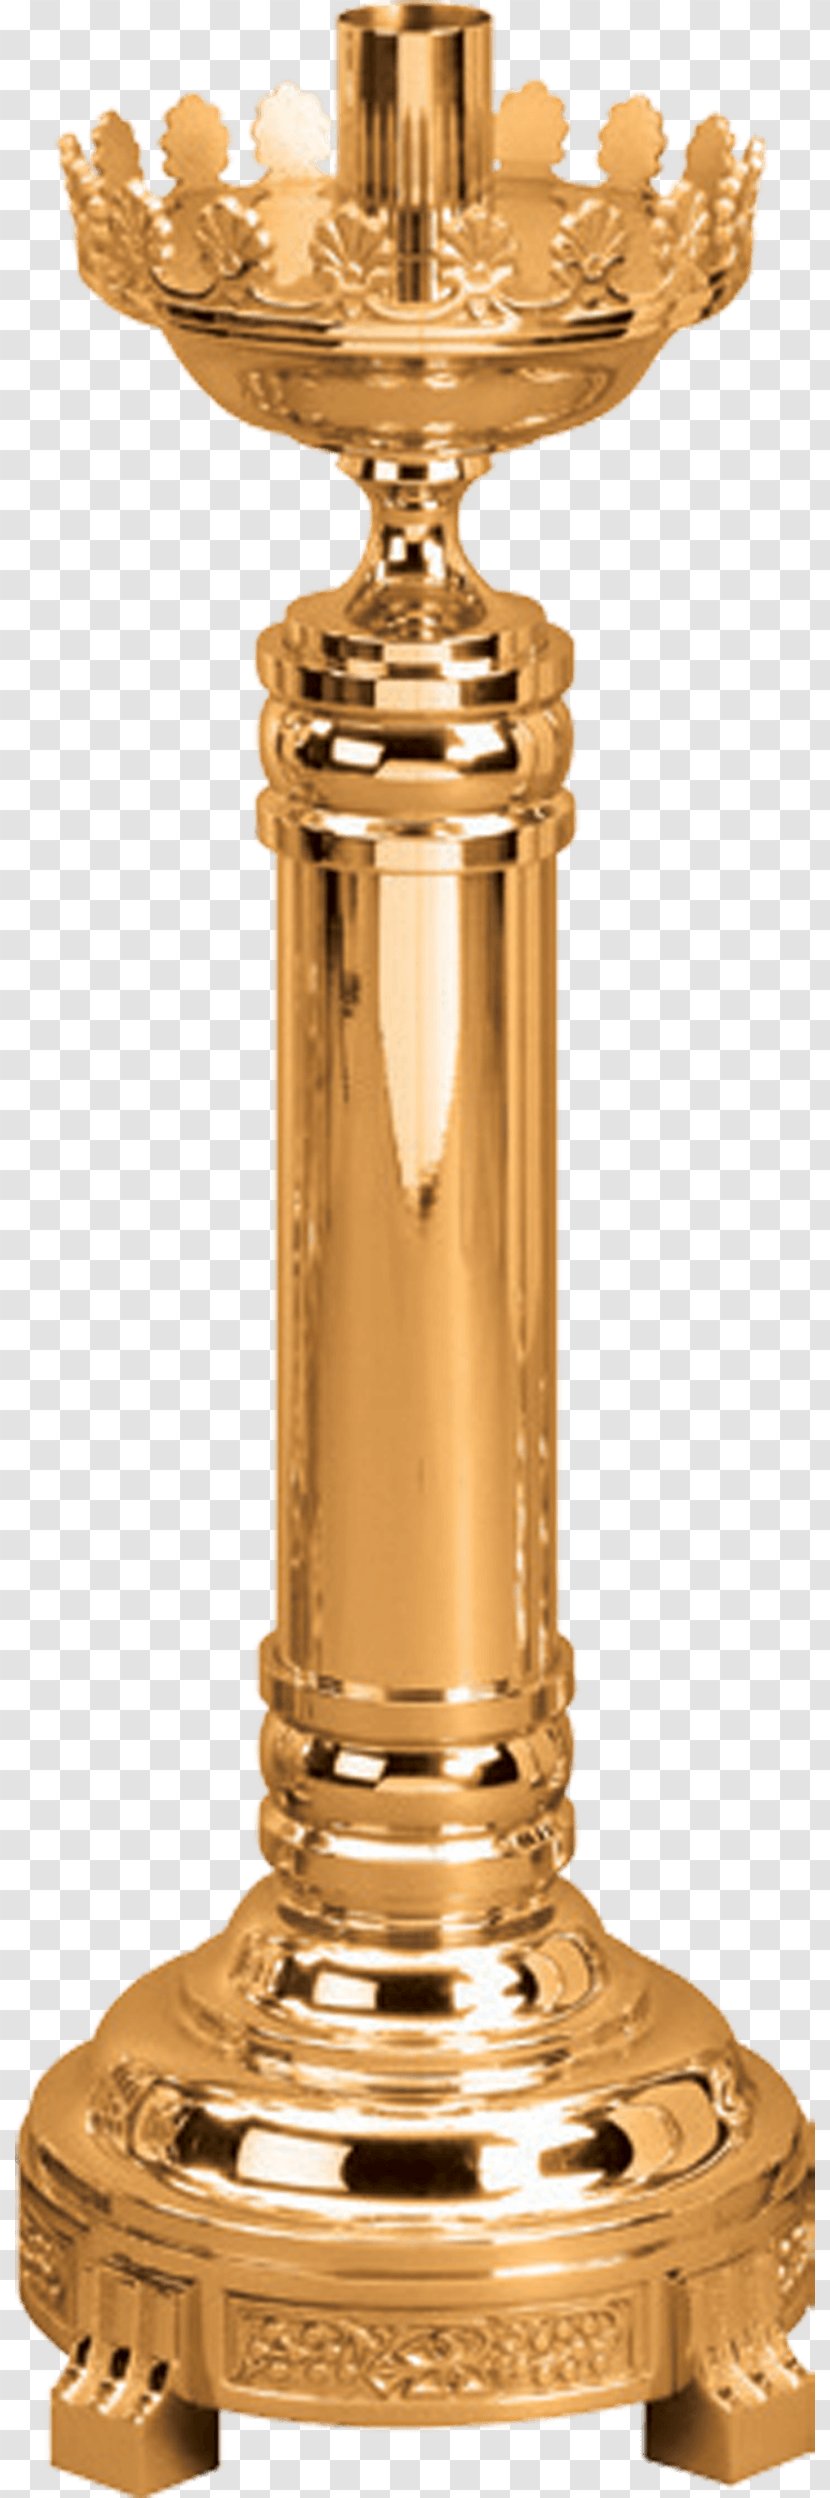 01504 Trophy Material Paschal Candle Inch Transparent PNG